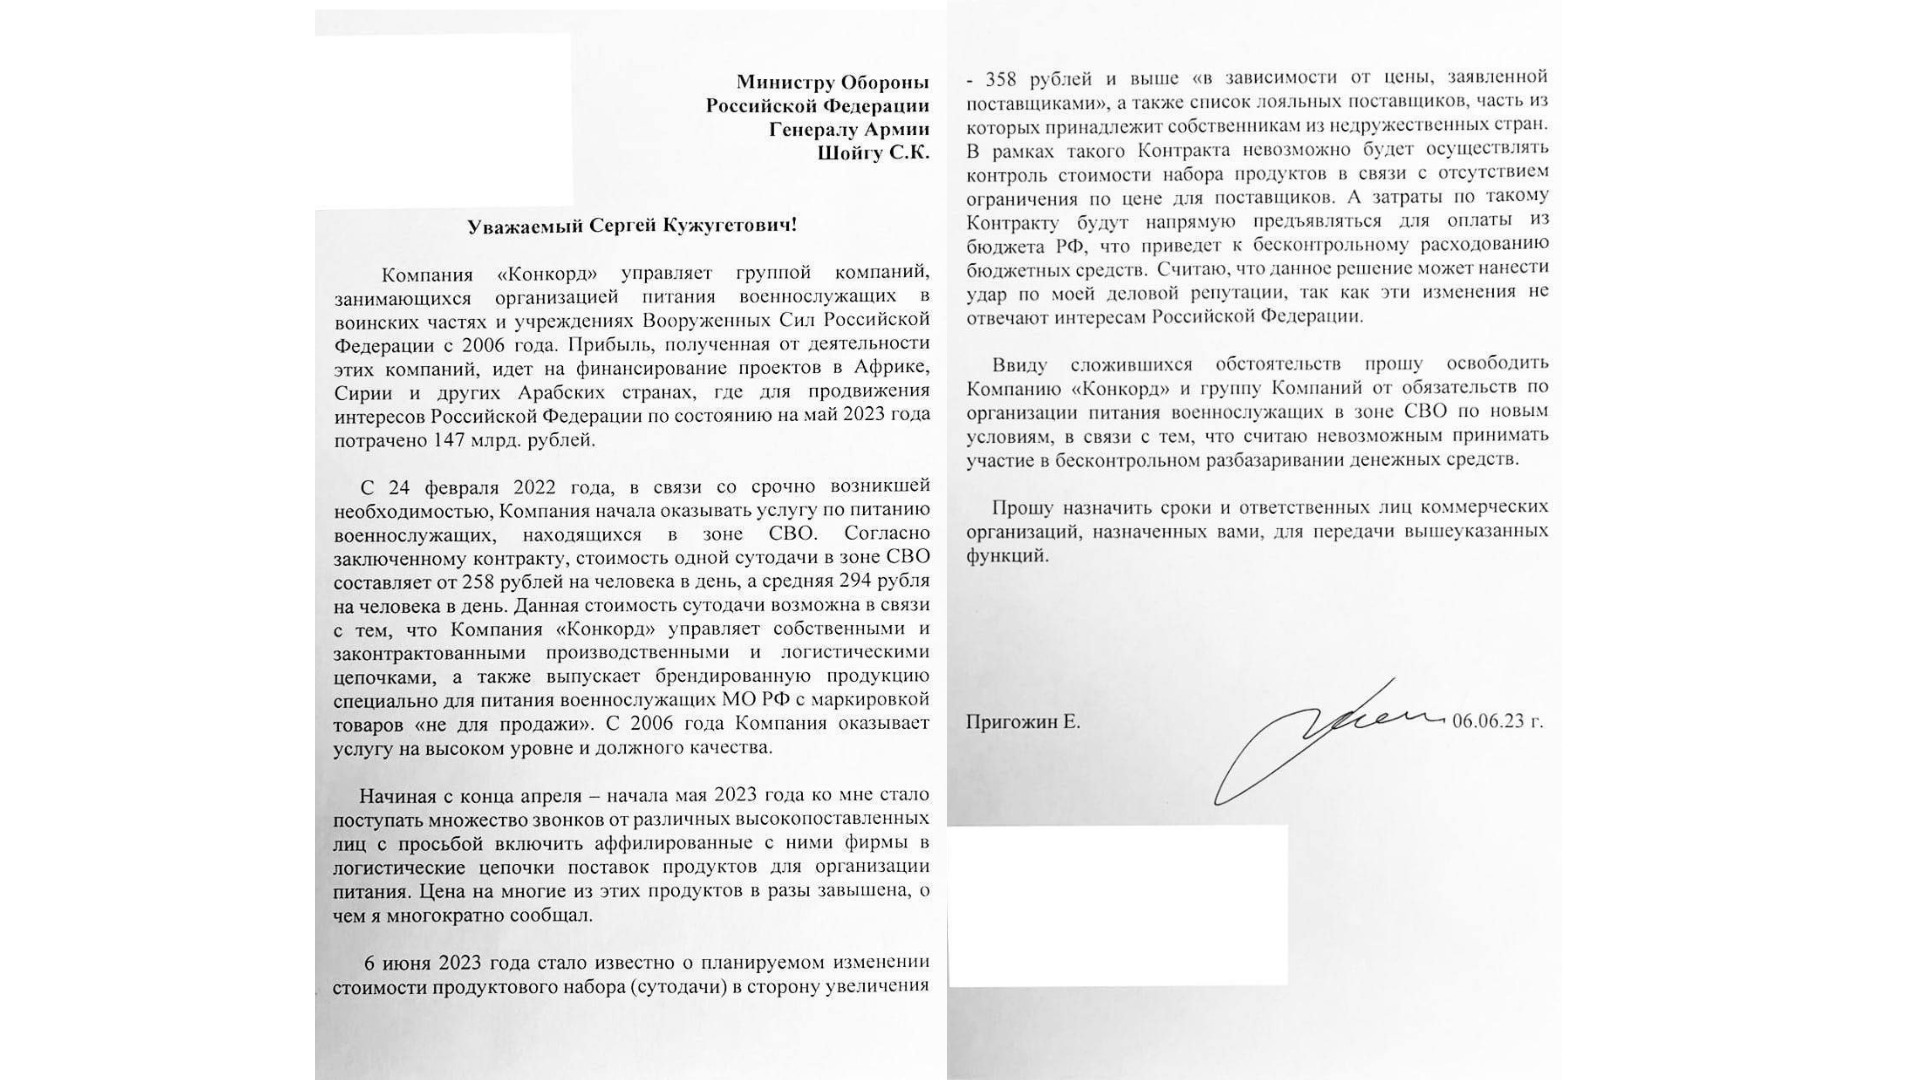 Original and translated copies of the letter from Yevgeny Prigozhin to Minister of Defense Sergei Shoigu. (Translation from Google Translate)